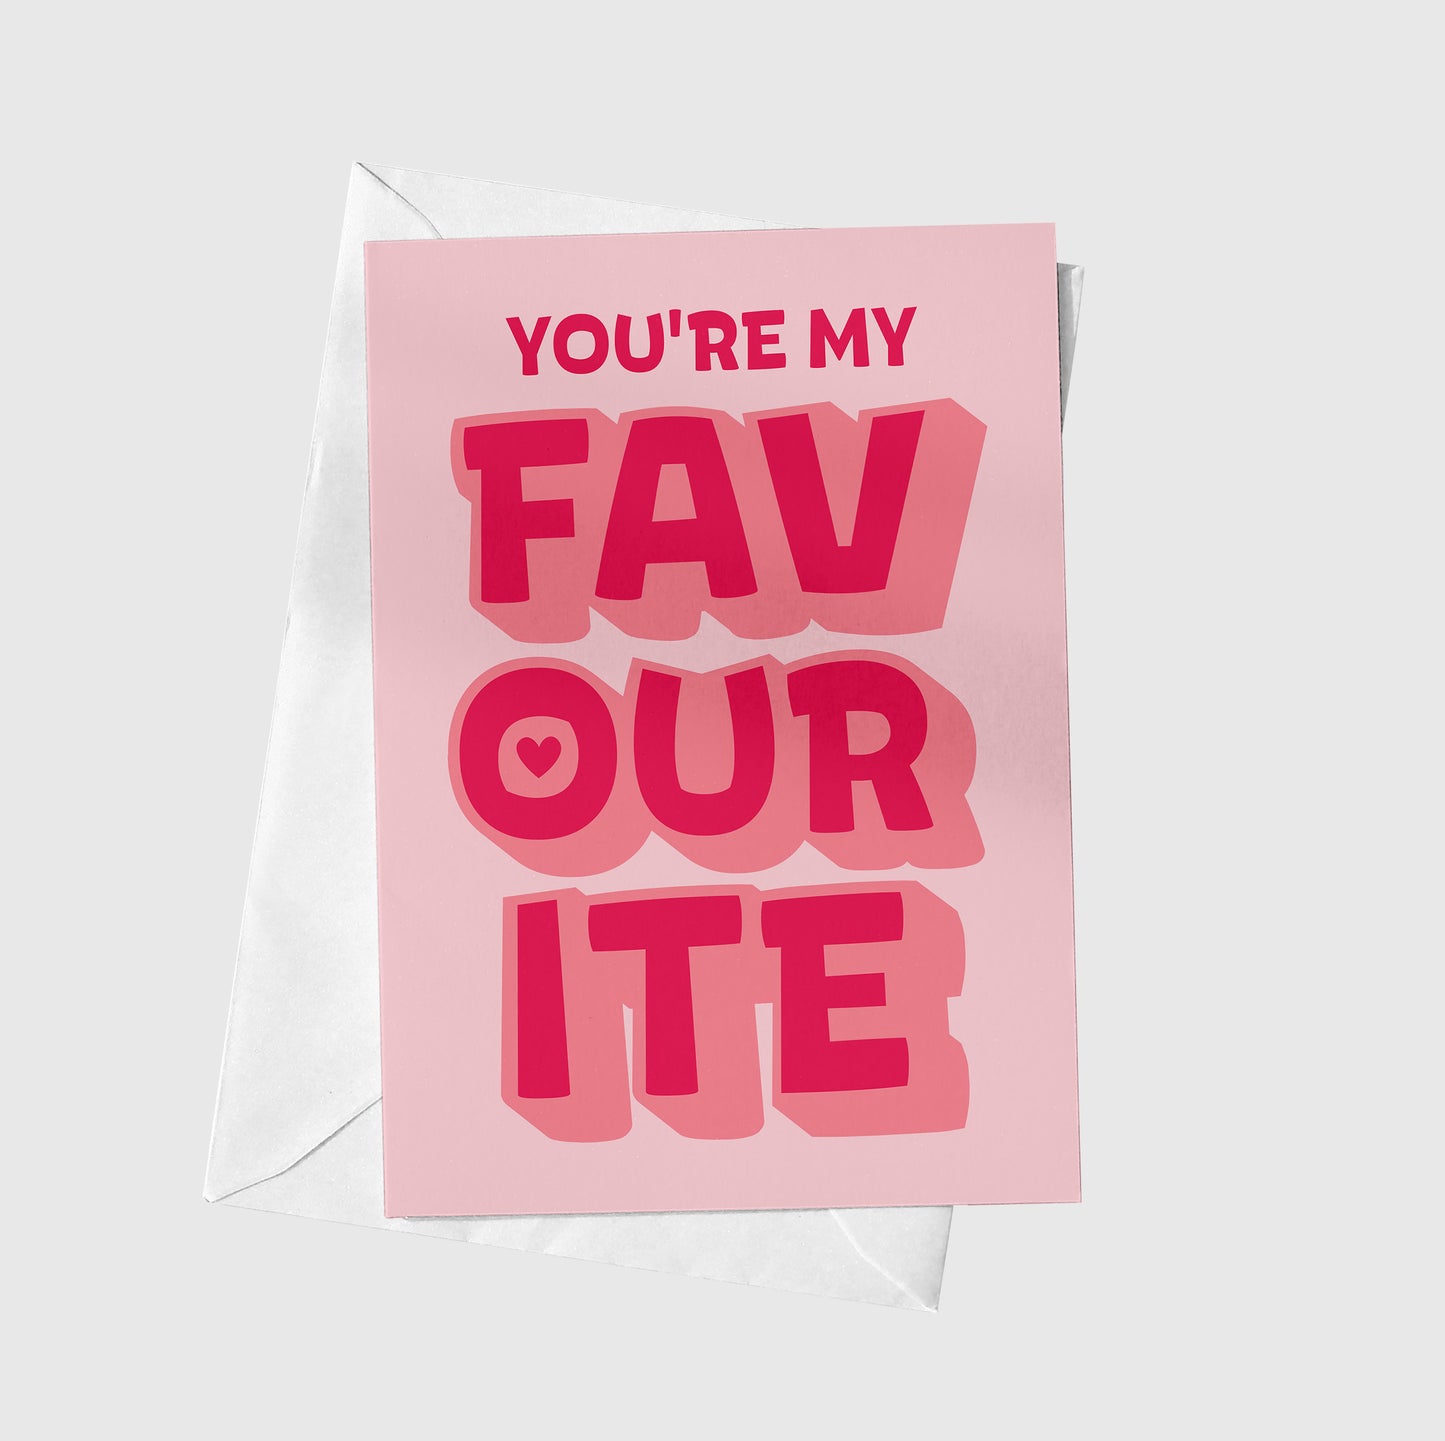 You're My Favourite!